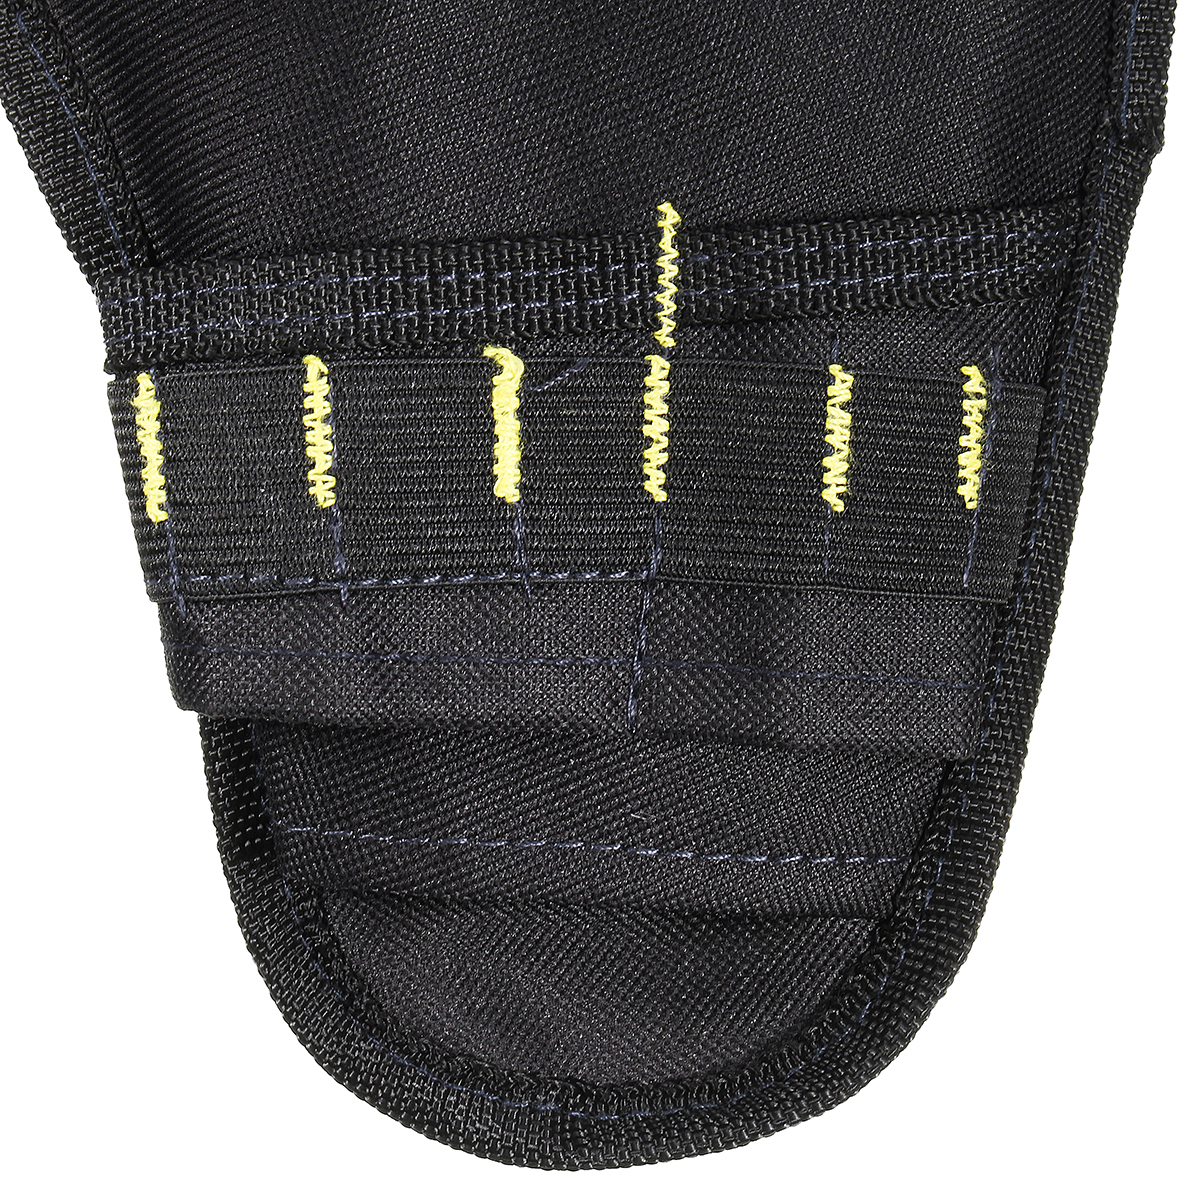 Heavy-Duty-Cordless-Impact-Drill-Holster-Tool-Bag-Belt-Pouch-Pocket-Holder-1187146-7